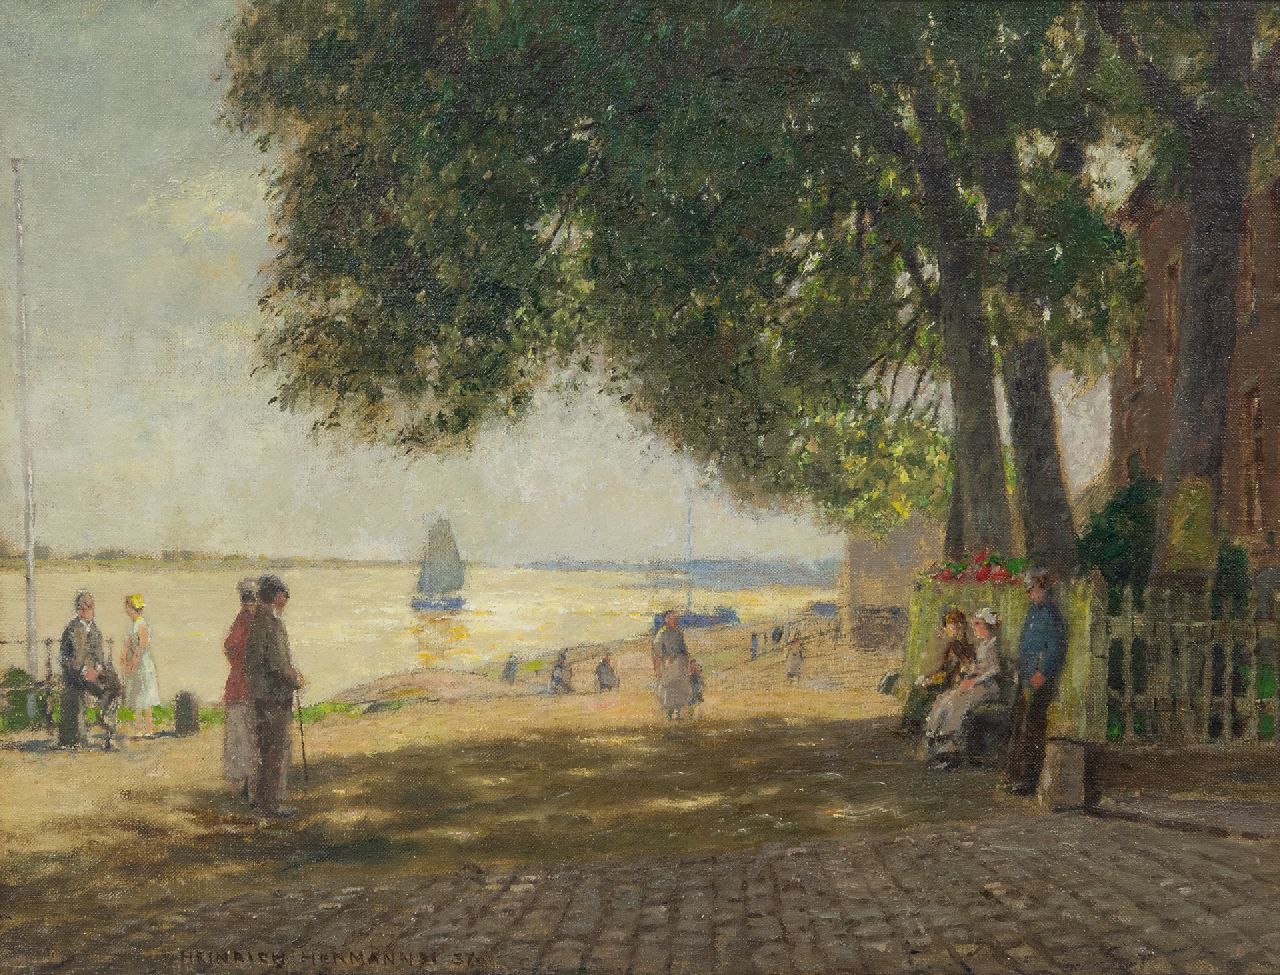 Hermanns H.  | Heinrich Hermanns | Paintings offered for sale | At the 'krantor' in Rees on the river Rhine, oil on canvas 35.4 x 46.3 cm, signed l.l. and dated '37